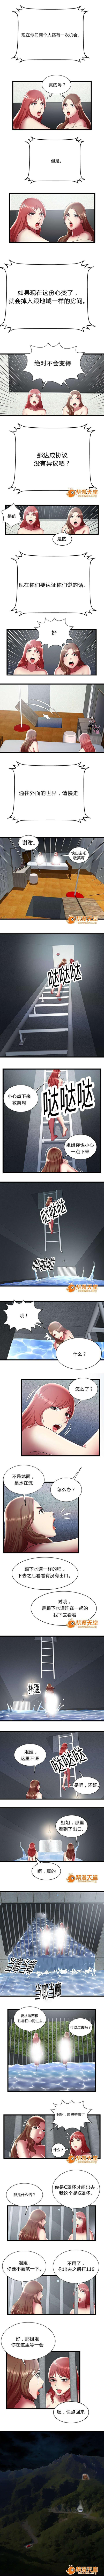 Doctor 脫逃遊戲 1-37 Hidden Camera - Page 71